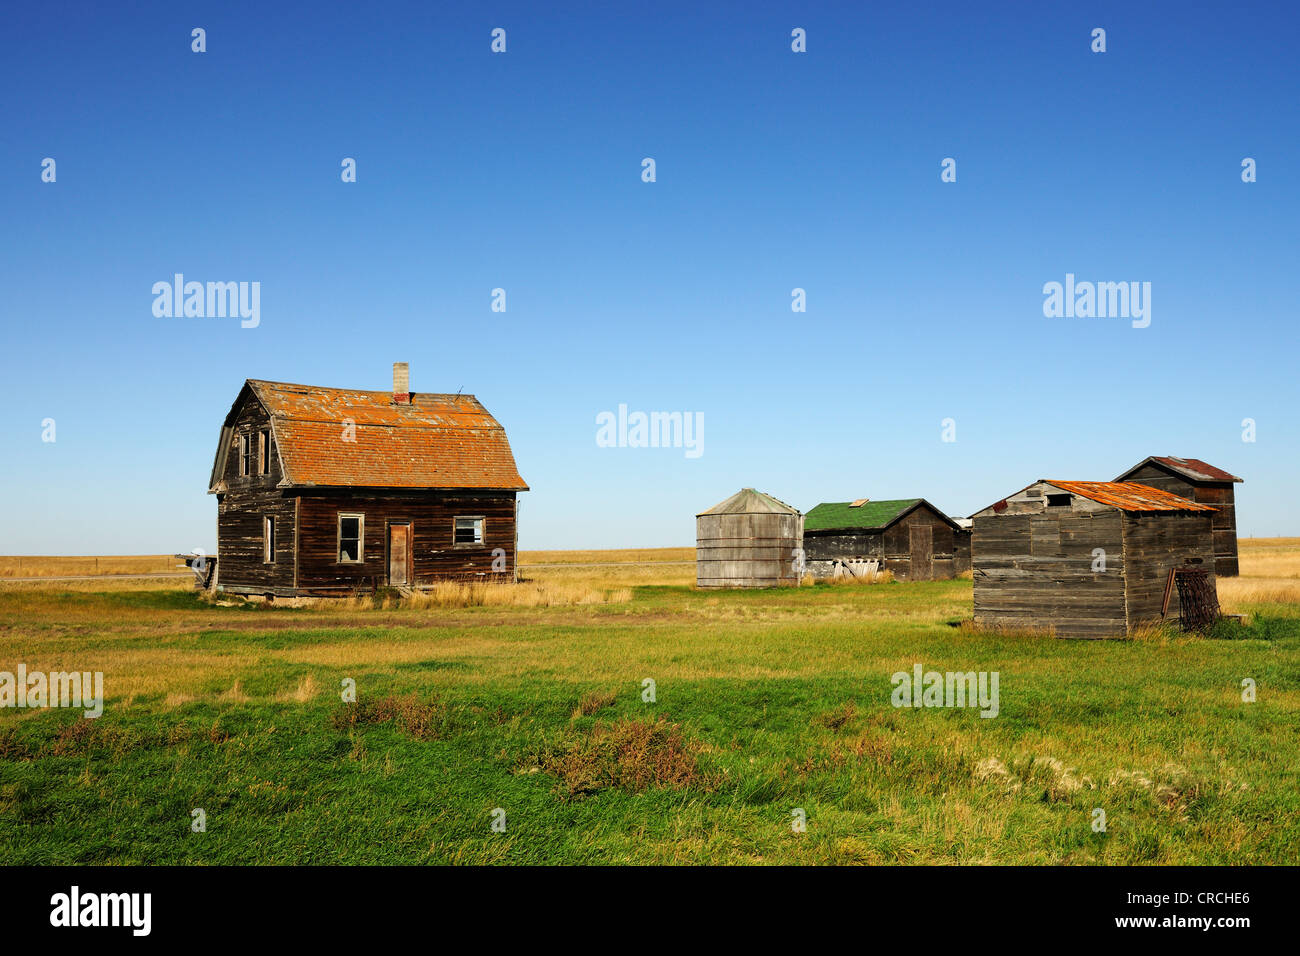 Old abandoned house with barn and grain silos in the Prairies, Saskatchewan, Canada Stock Photo